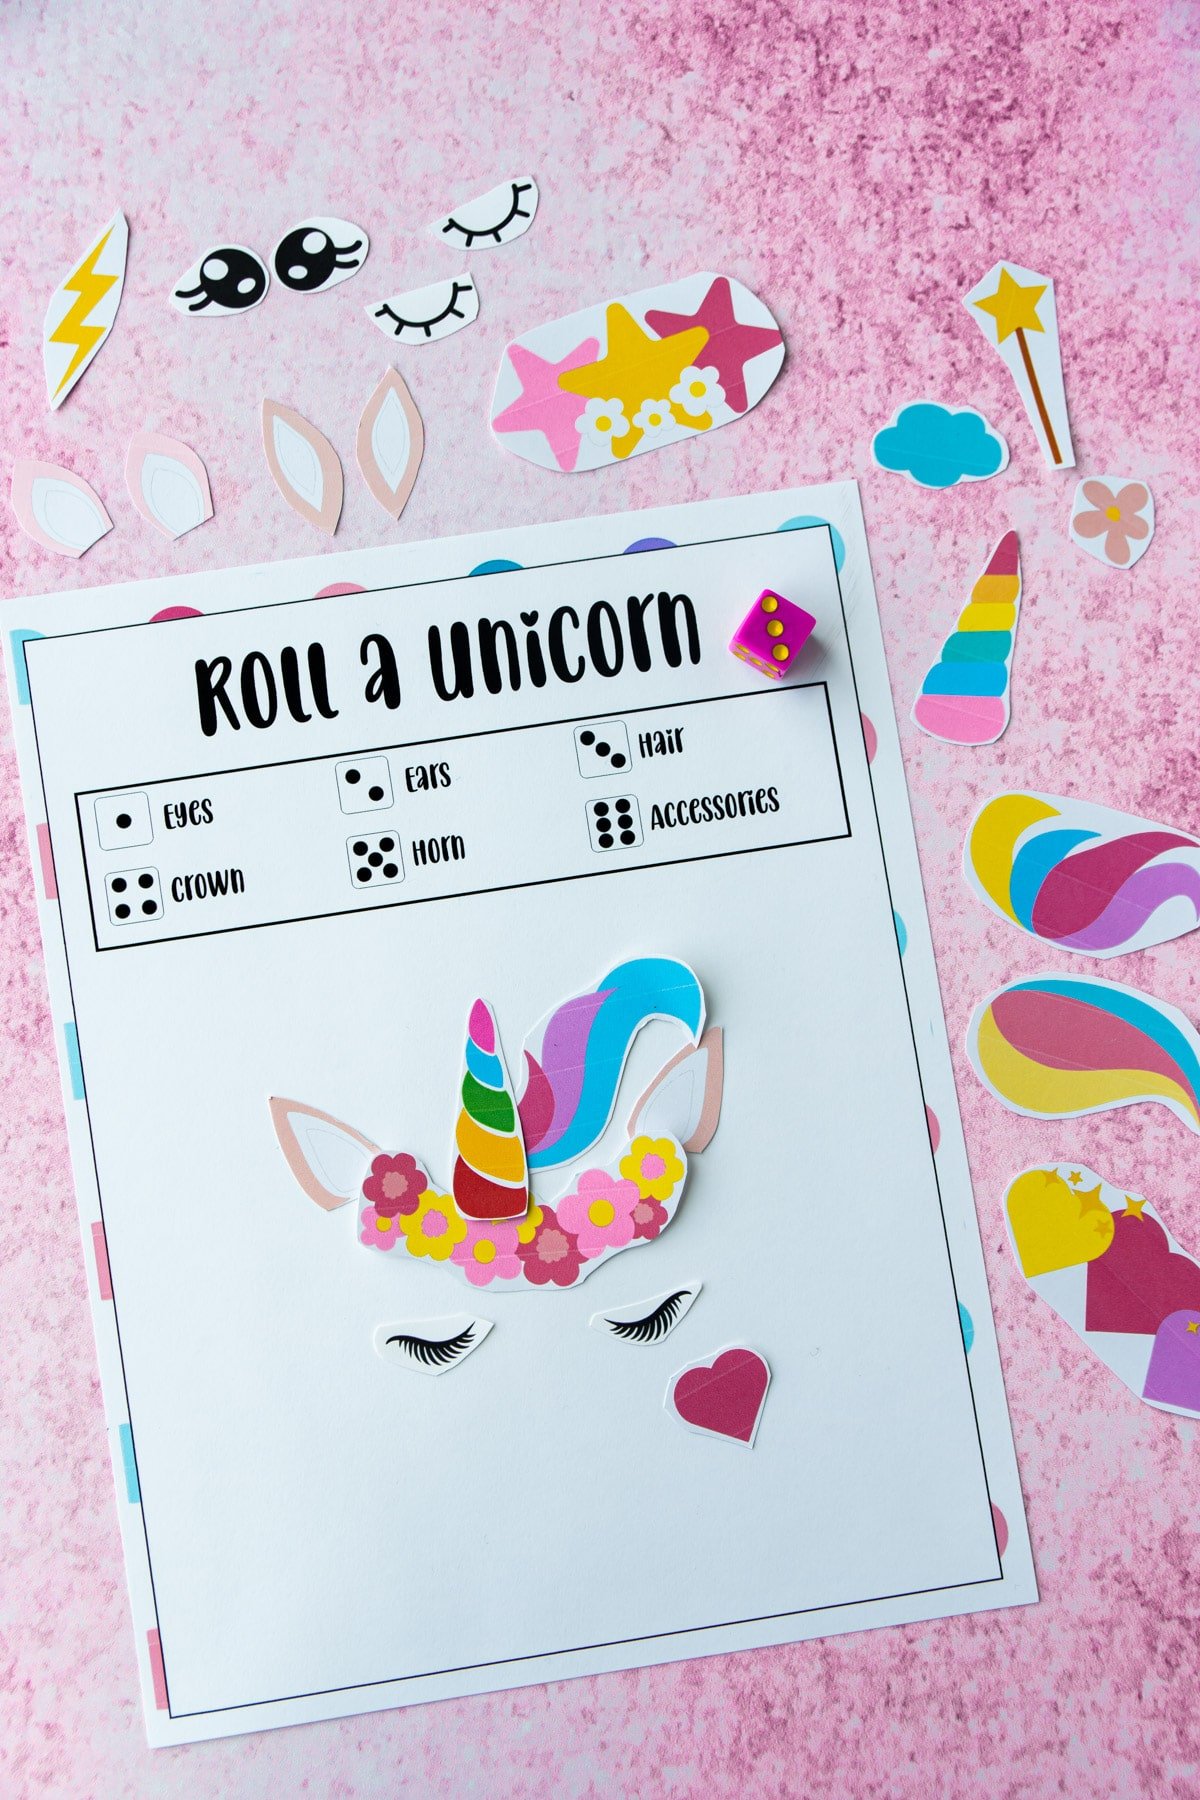 Roll a unicorn game with unicorn finished